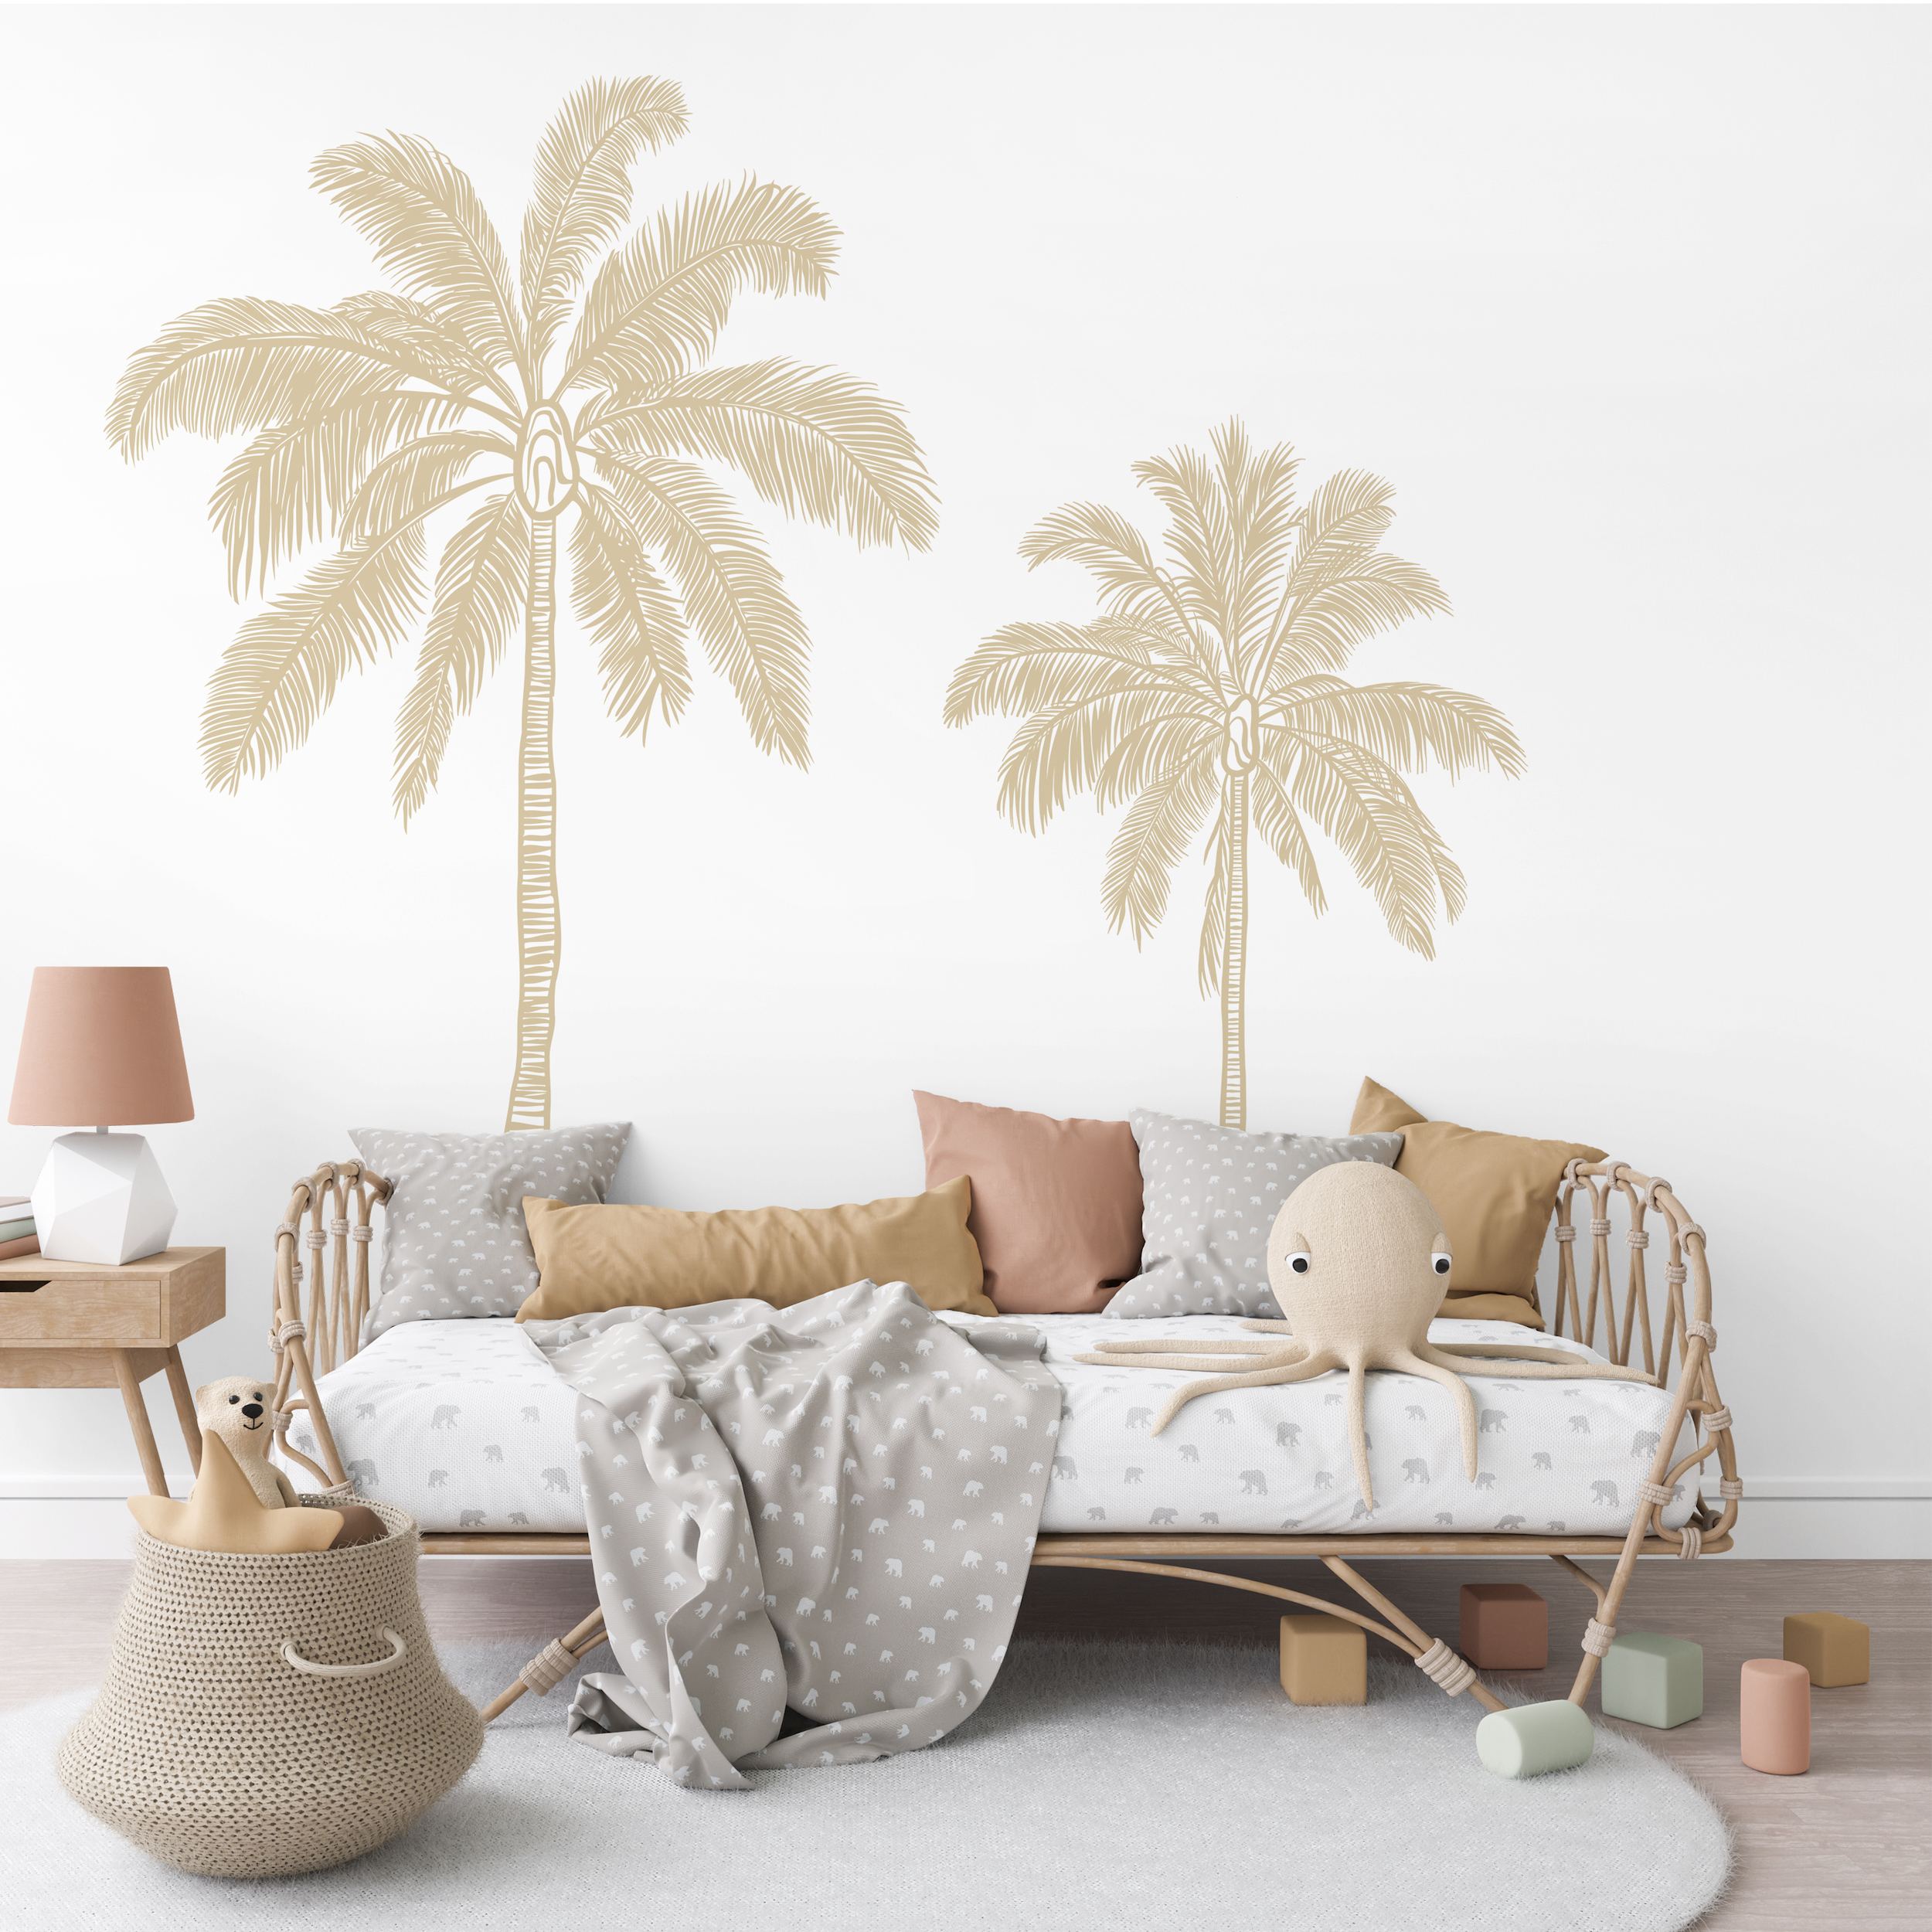 Set-of-Palm-Tree-Wall-Stickers-Decals